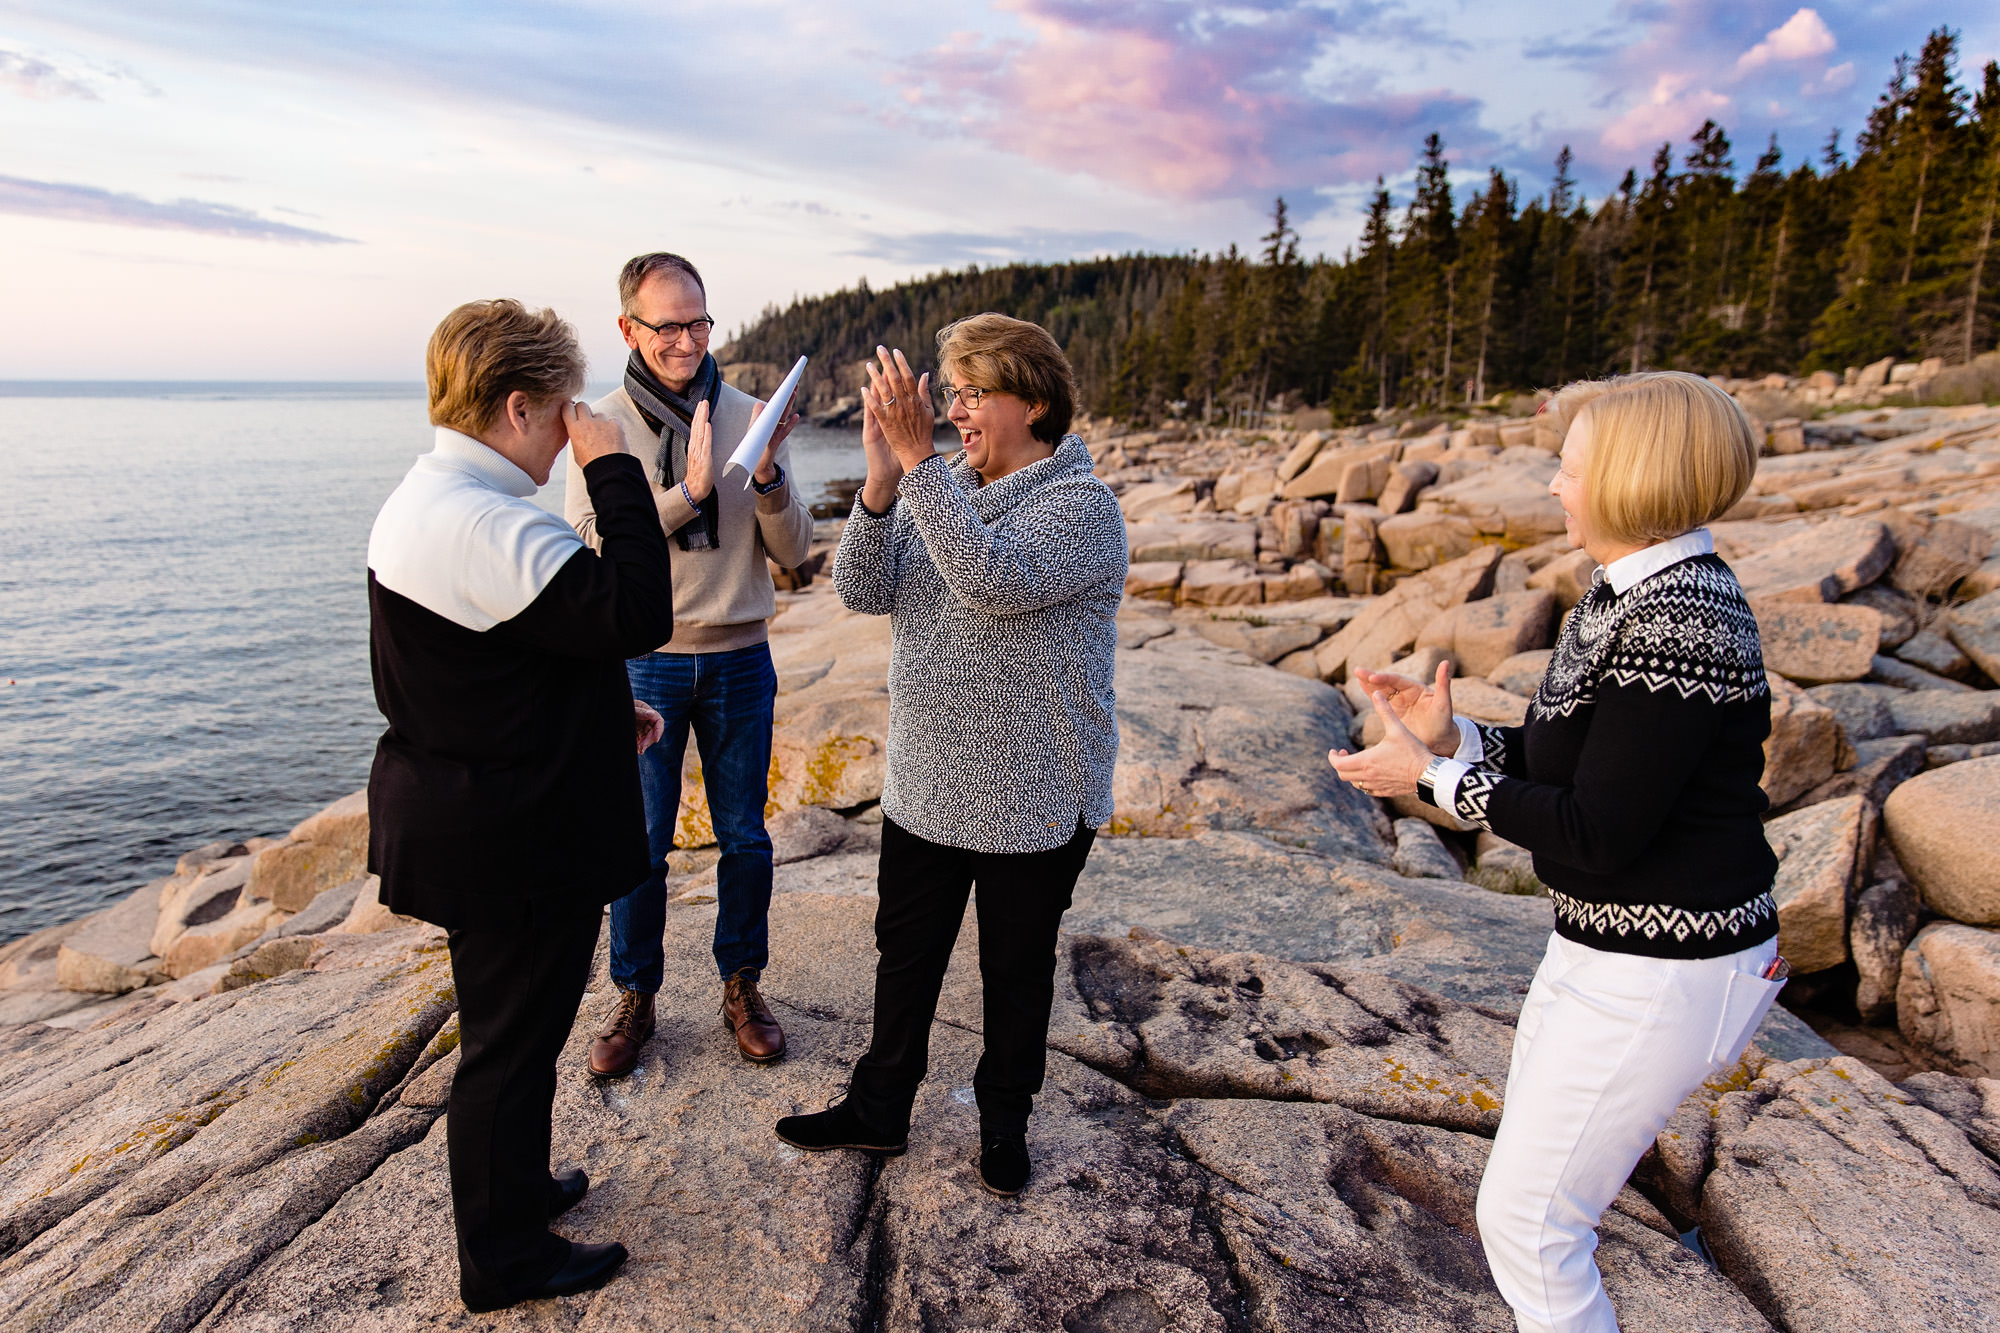 Two women elope in Acadia National Park at sunrise